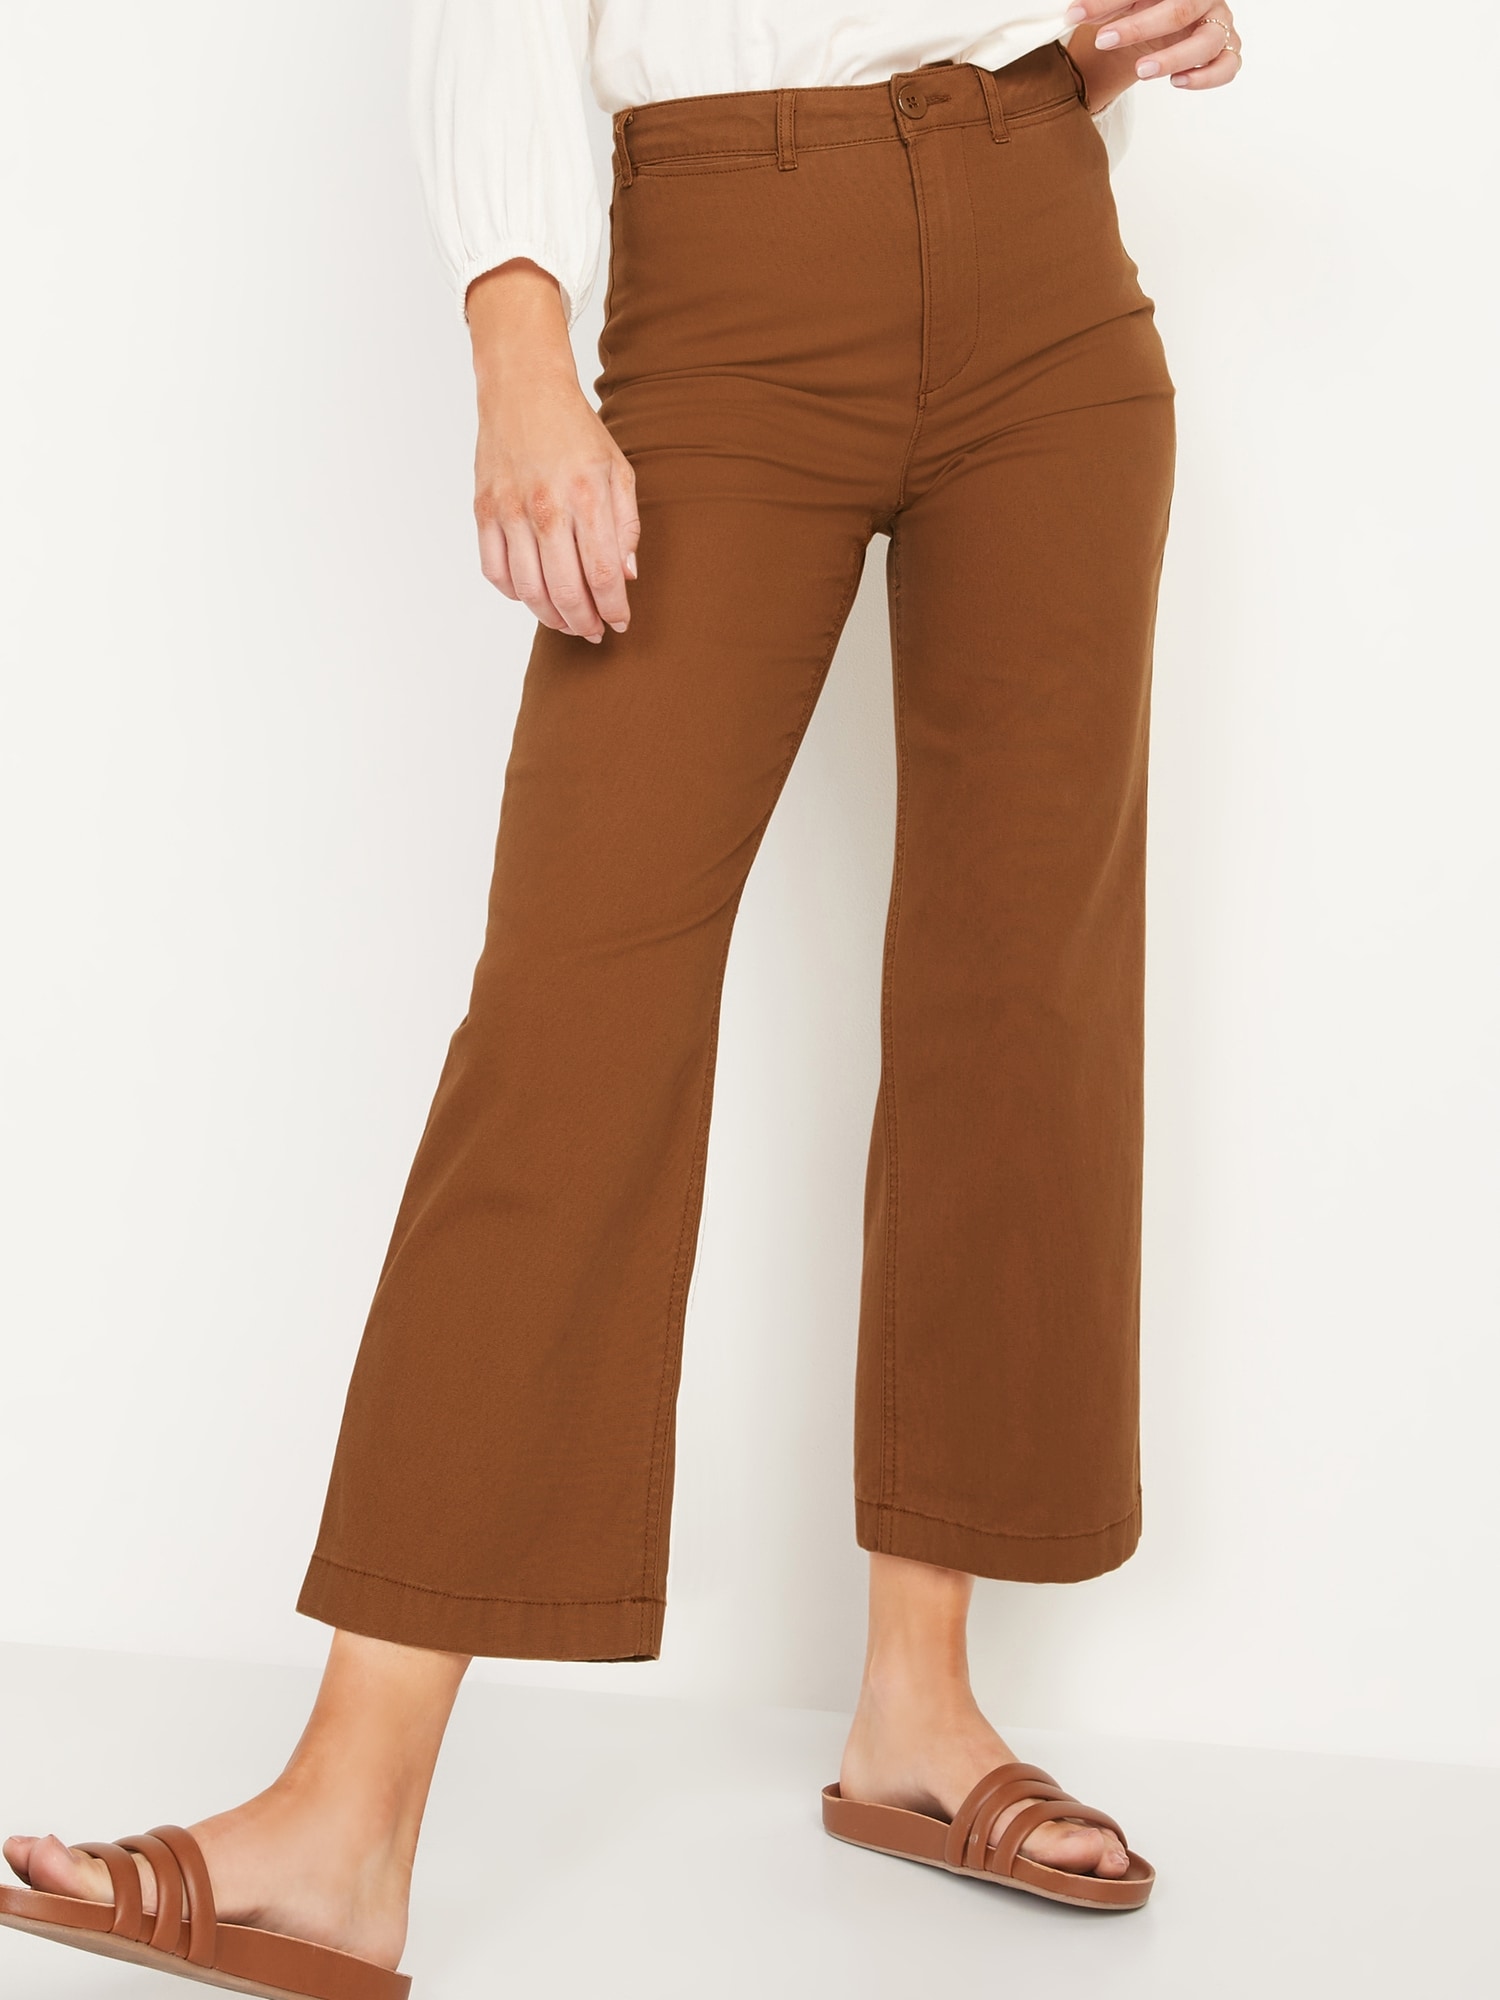  Cropped Pants For Women